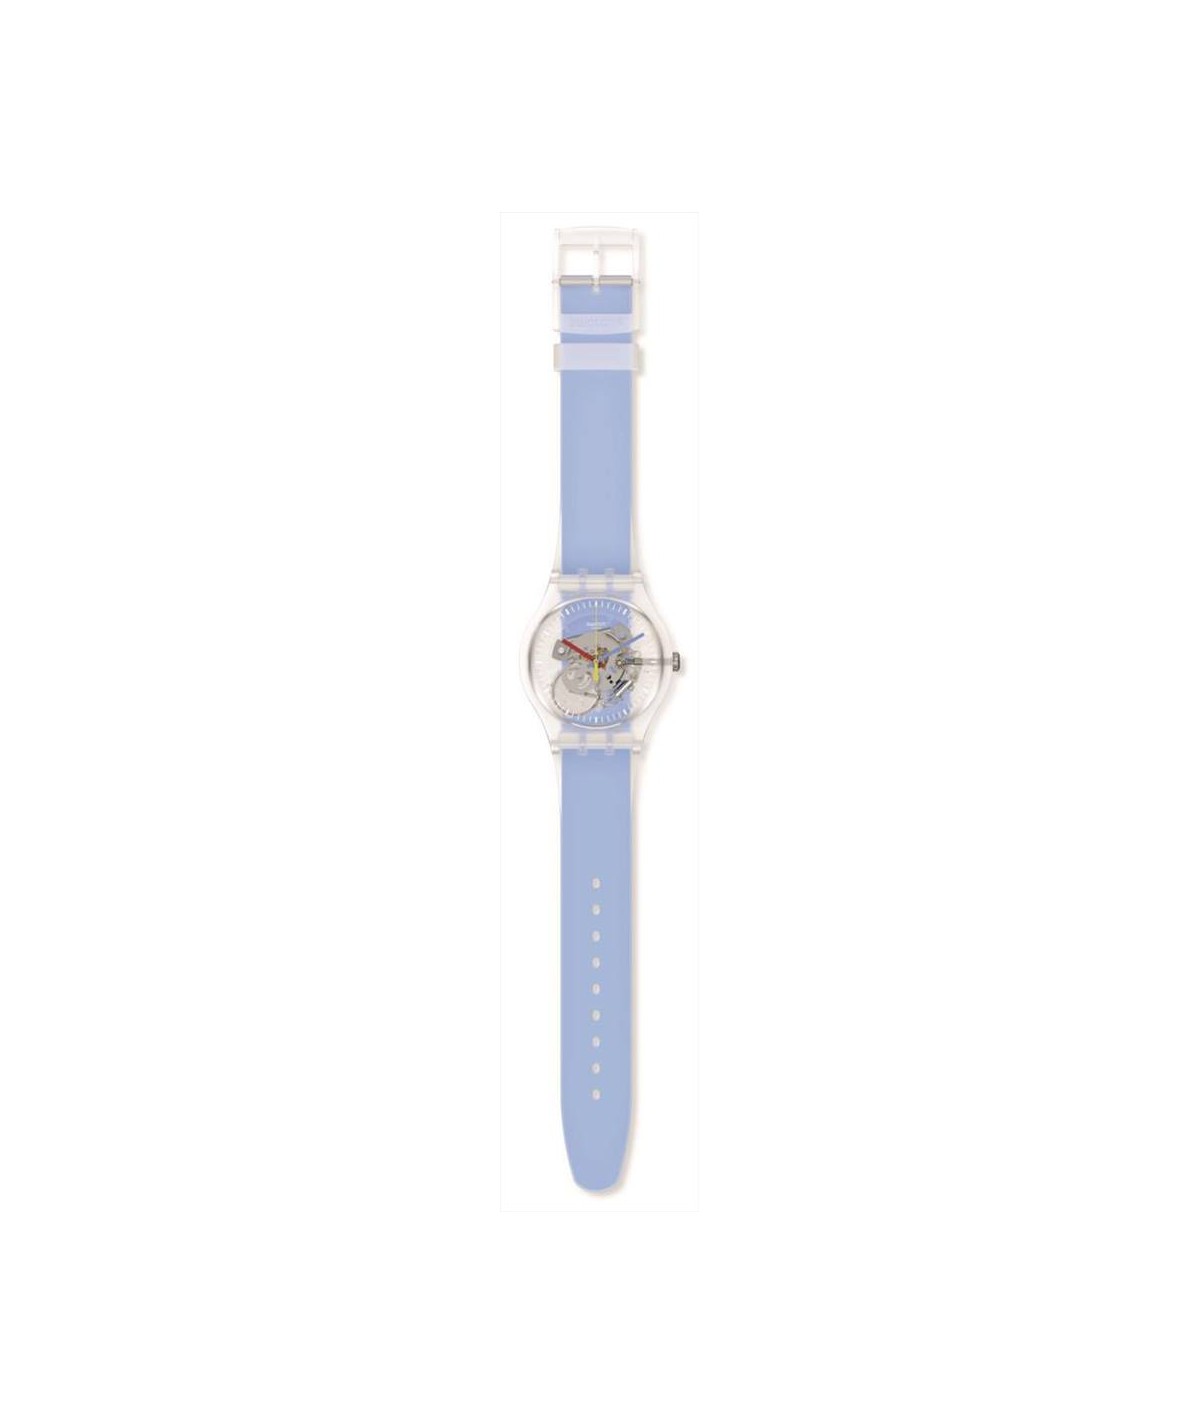 OROLOGIO SWATCH CLEARLY...